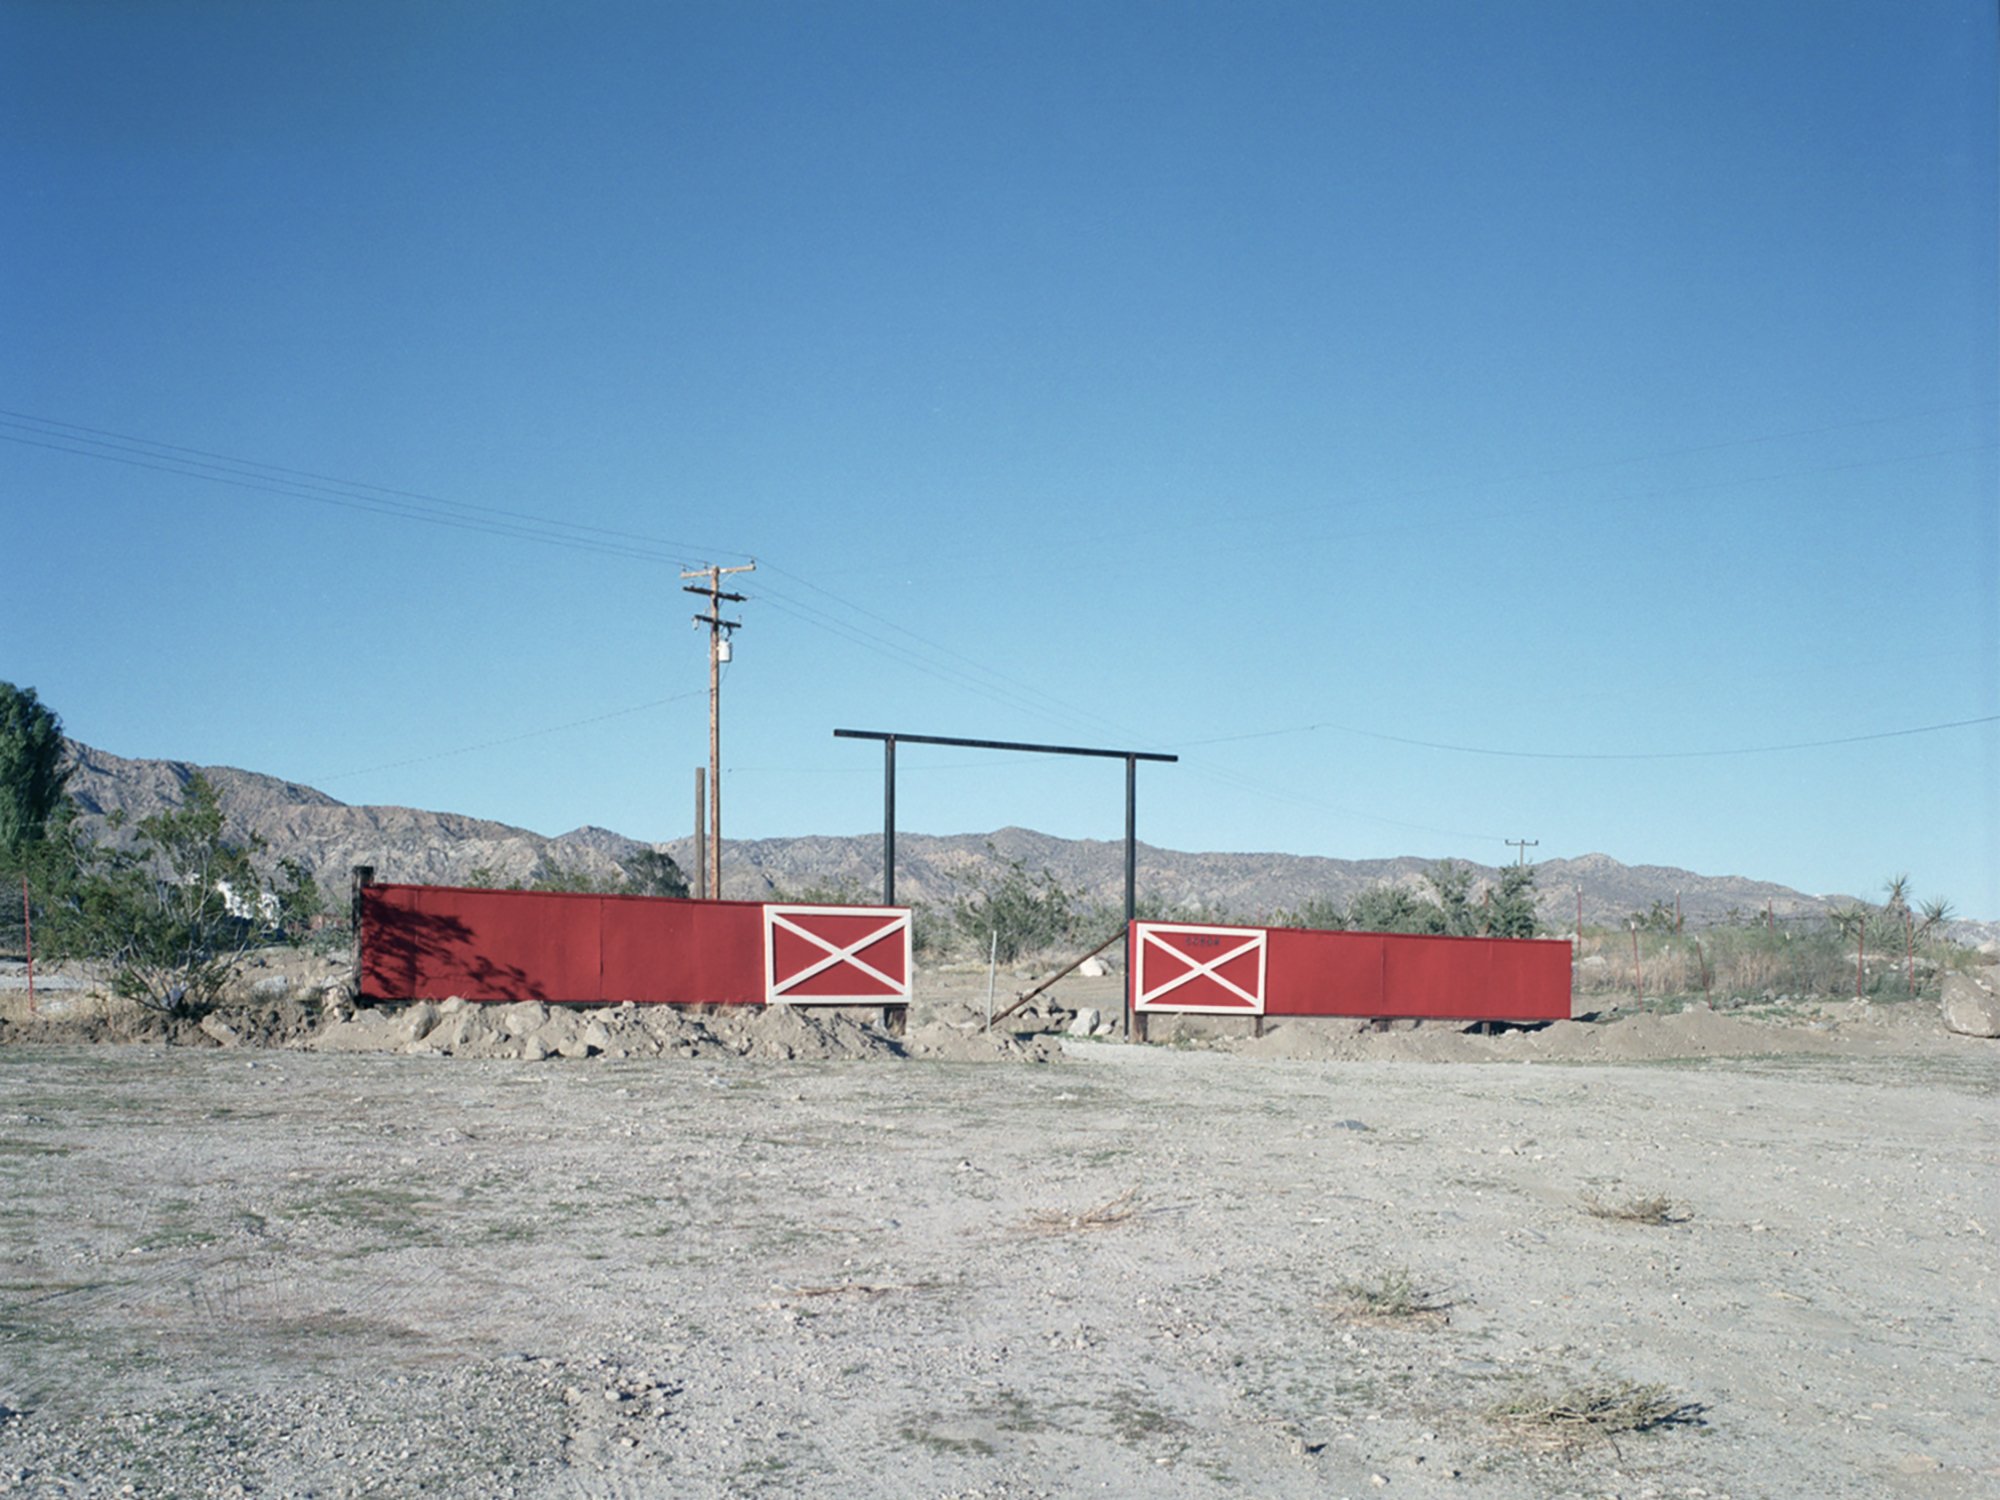 out-west-landscape-morongo-valley-california-red-gate.jpg